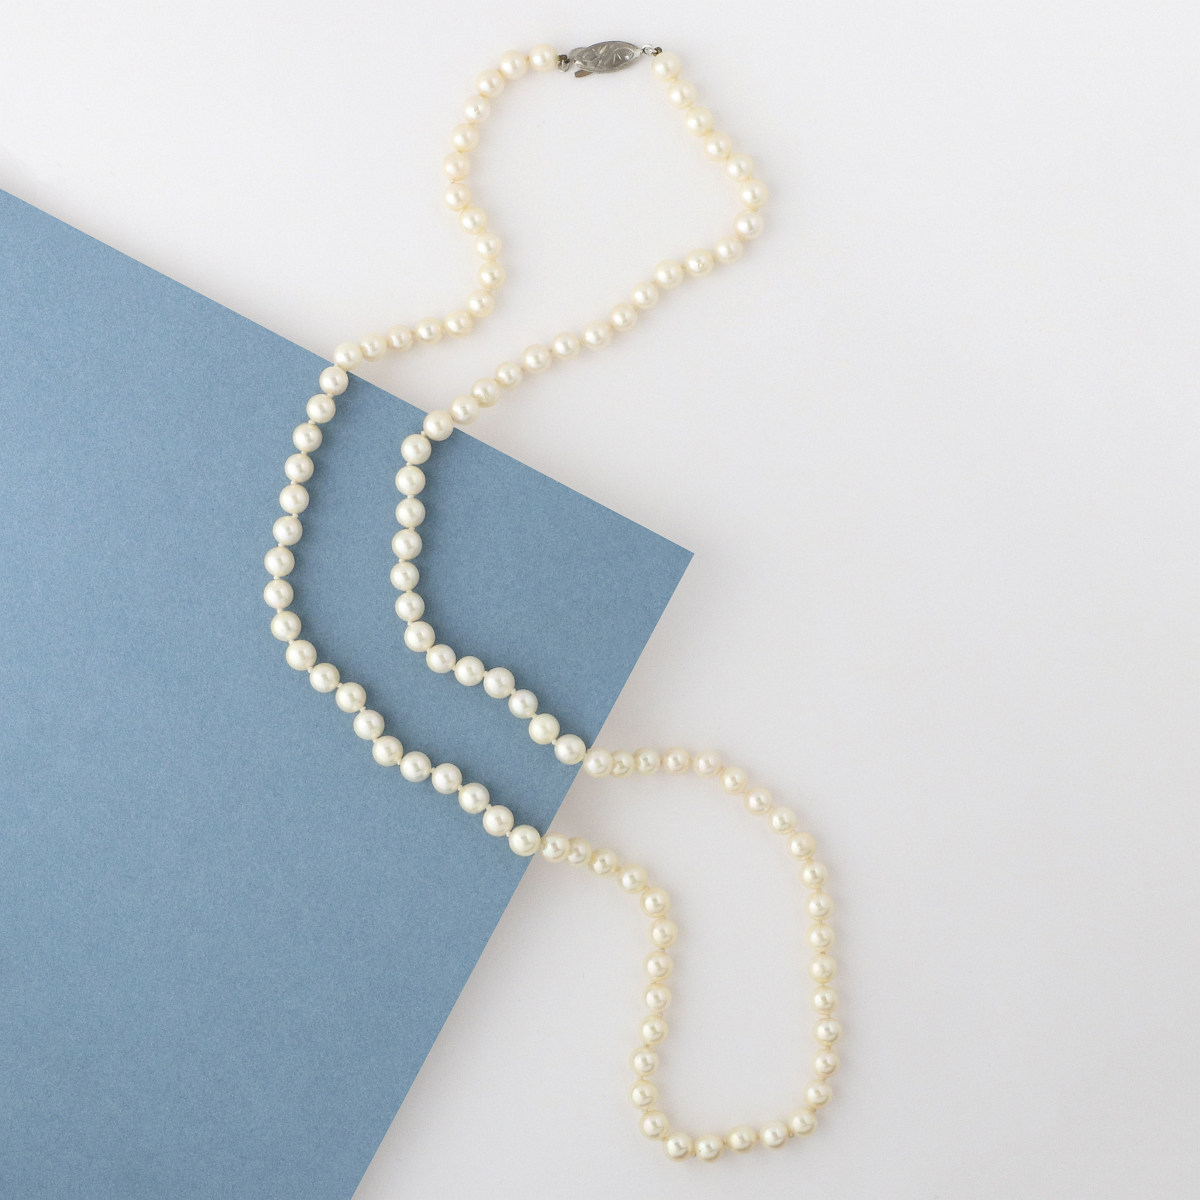 AN MATINEE LENGTH STRAND OF CULTURED PEARLS